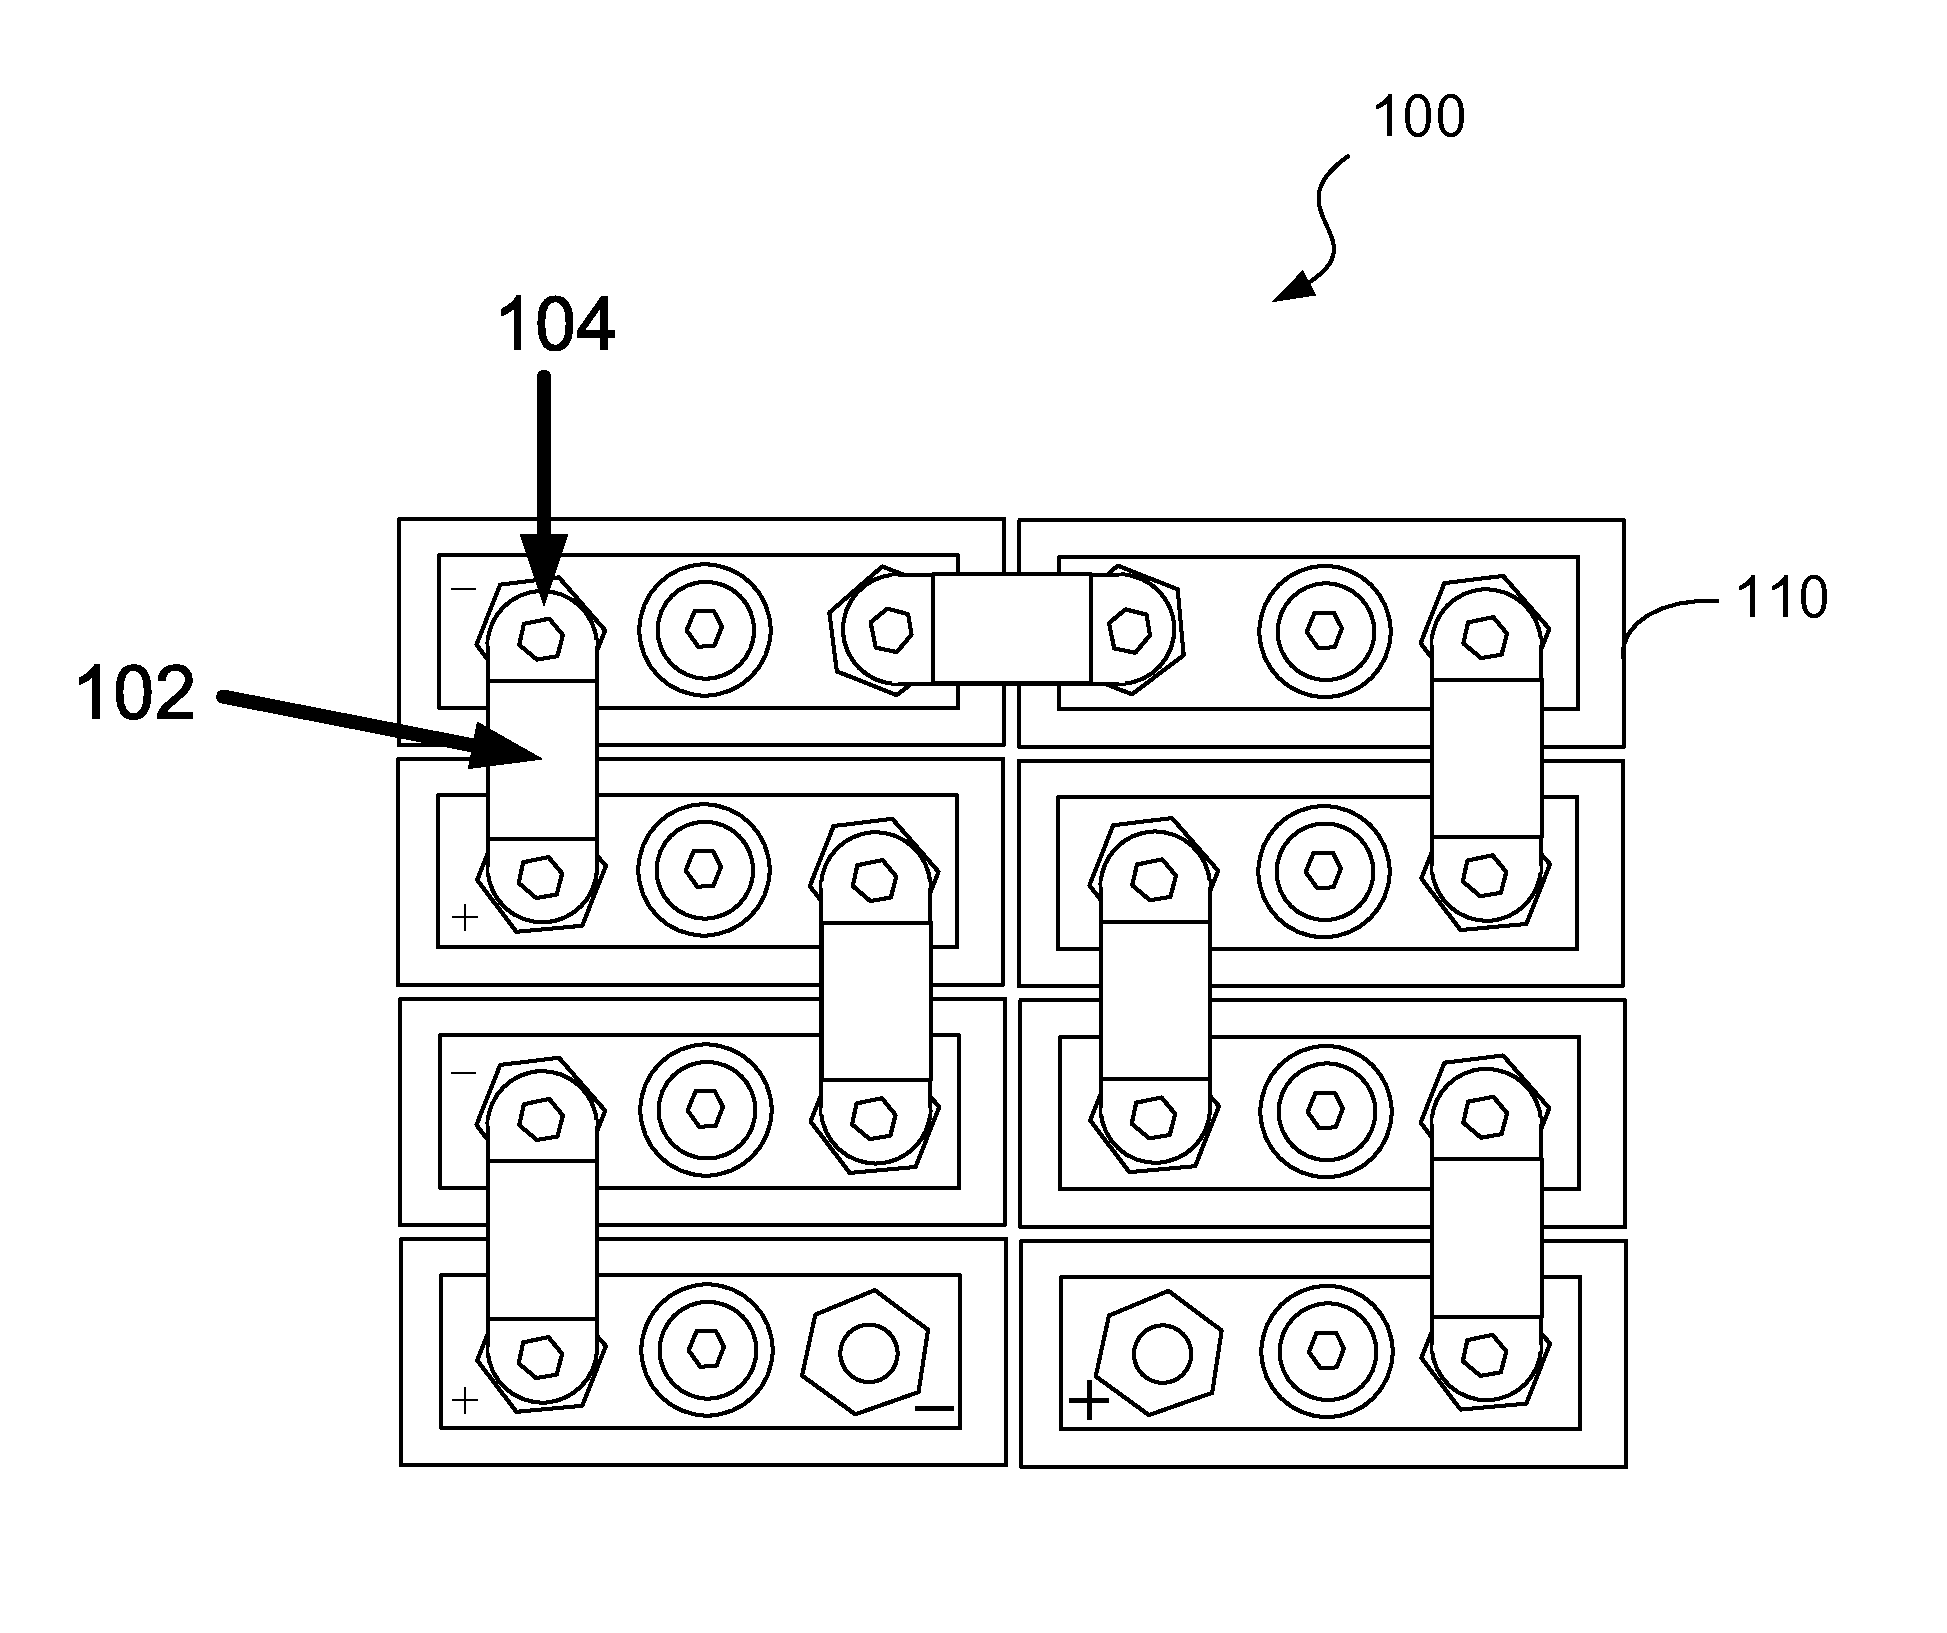 Method and Apparatus for Contact Detection in Battery Packs